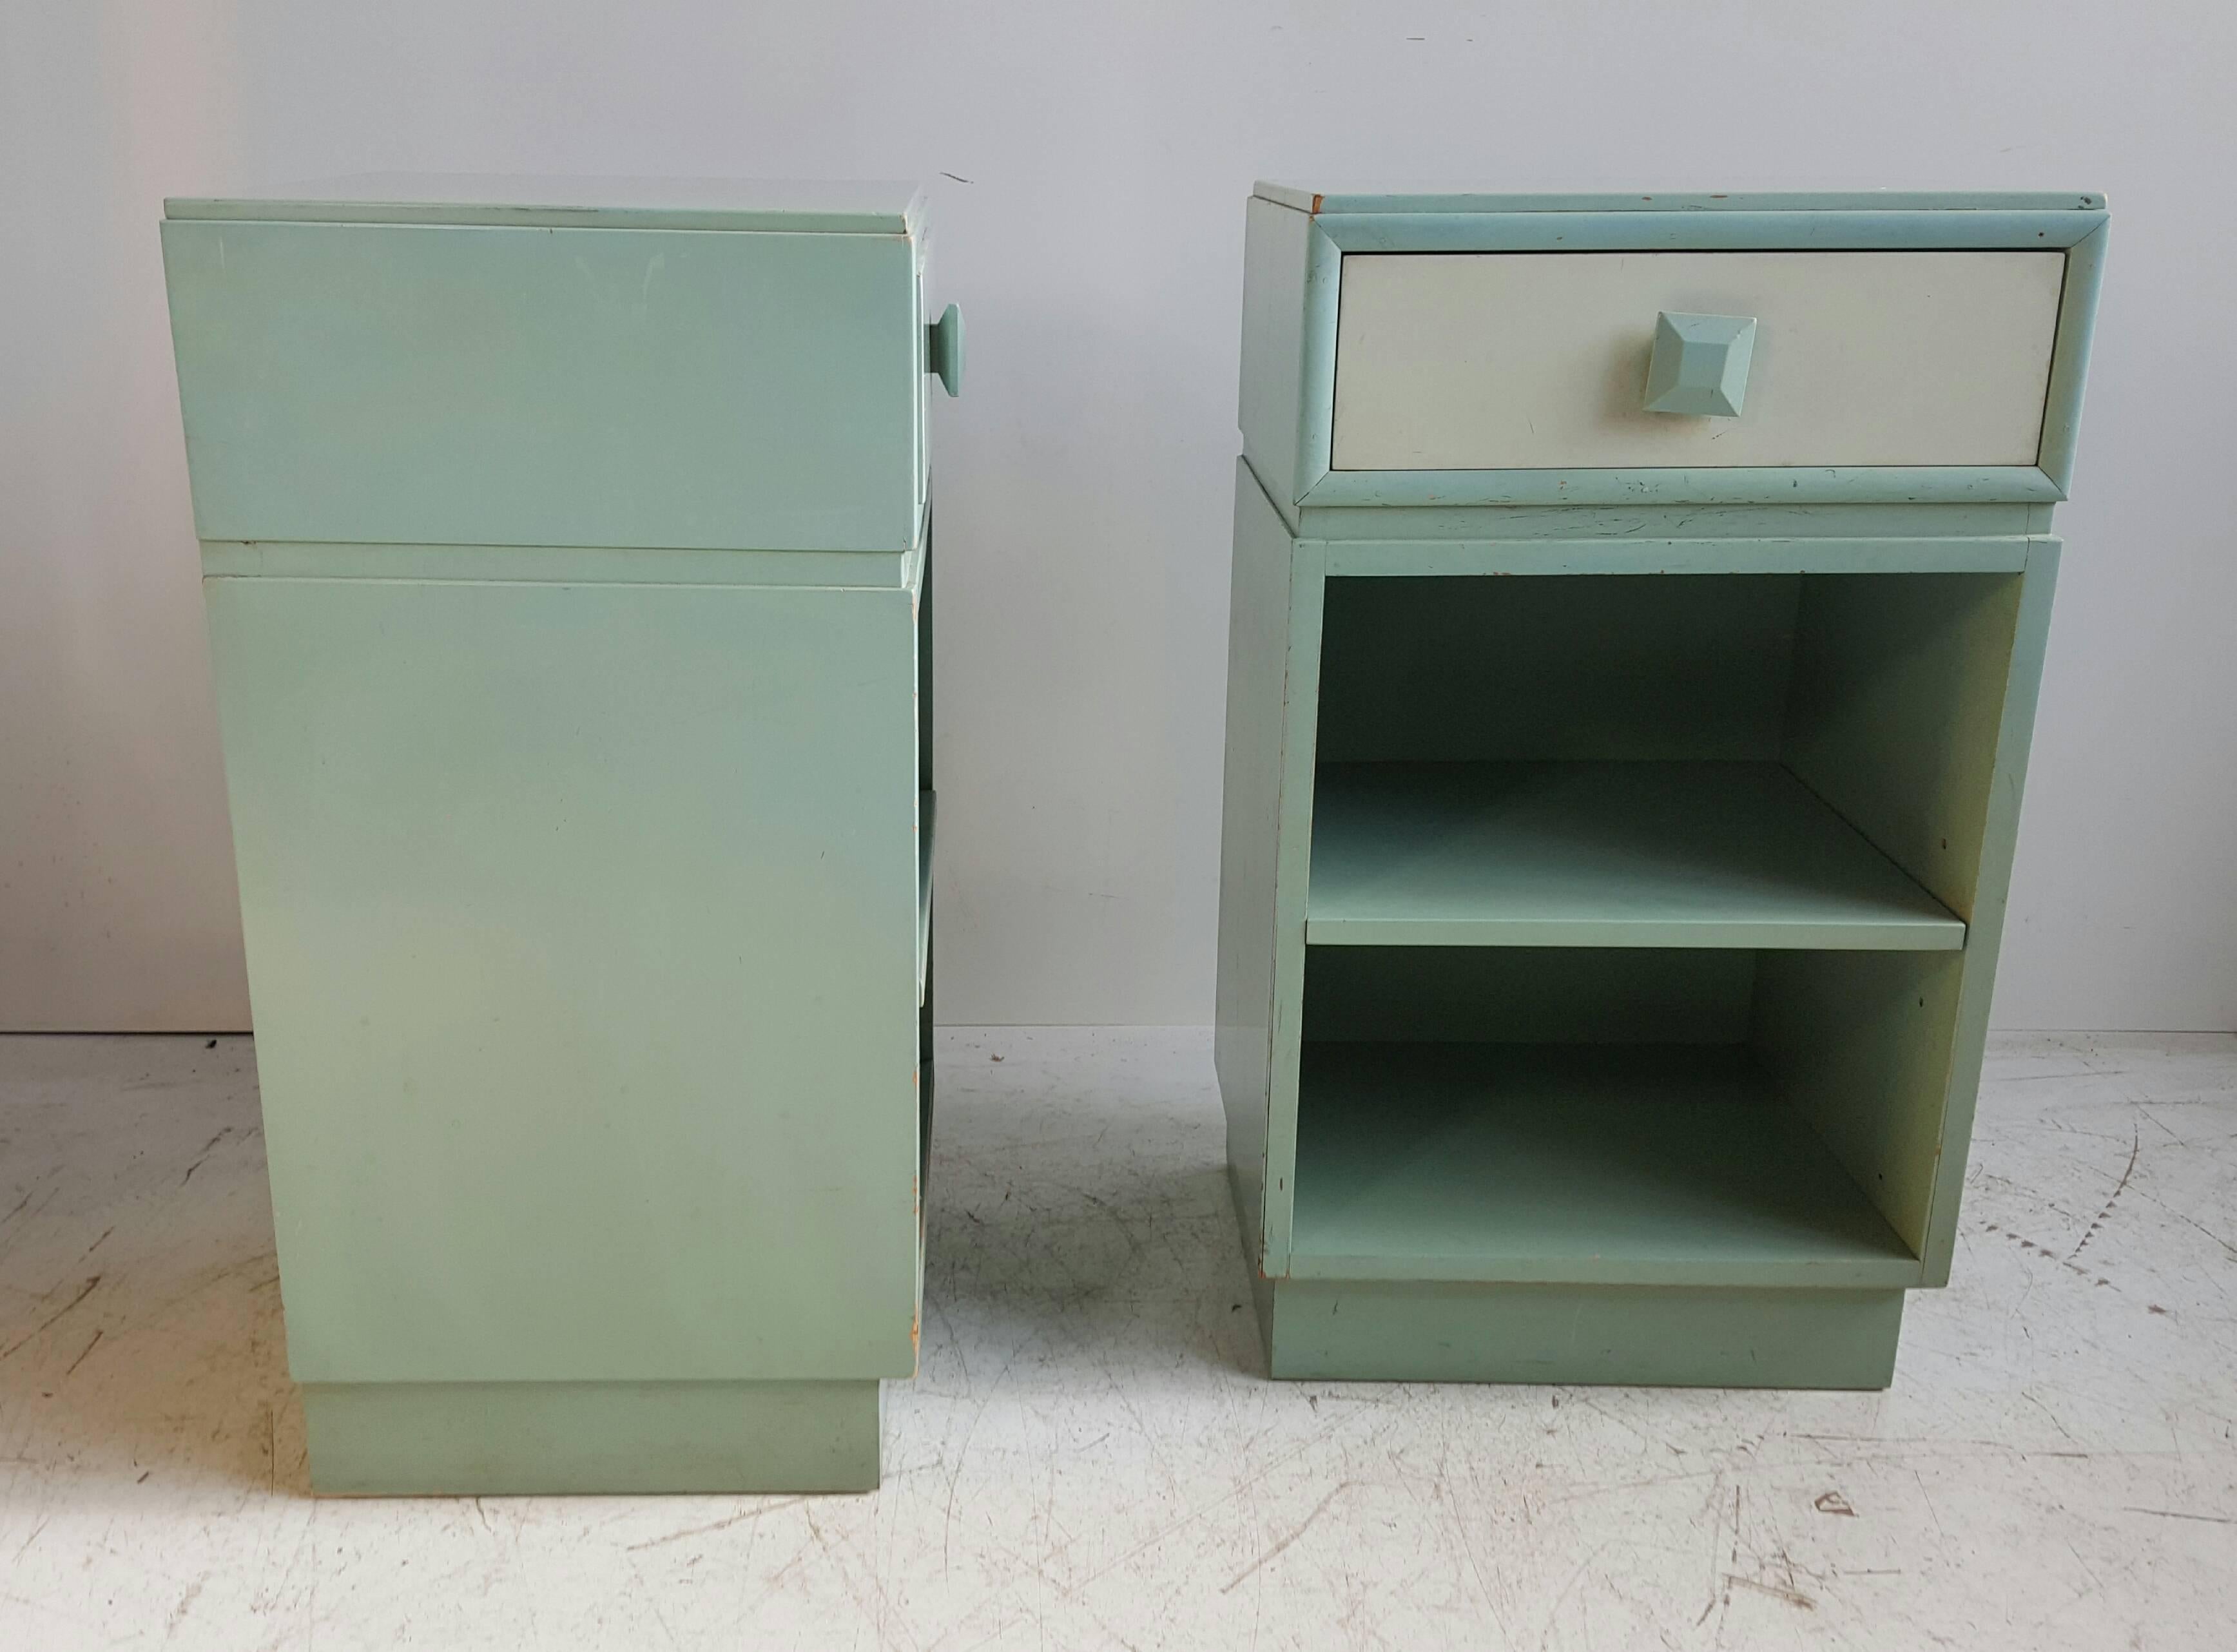 Classic Mid-Century Modern Night Stands/Tables by Kittinger In Good Condition For Sale In Buffalo, NY